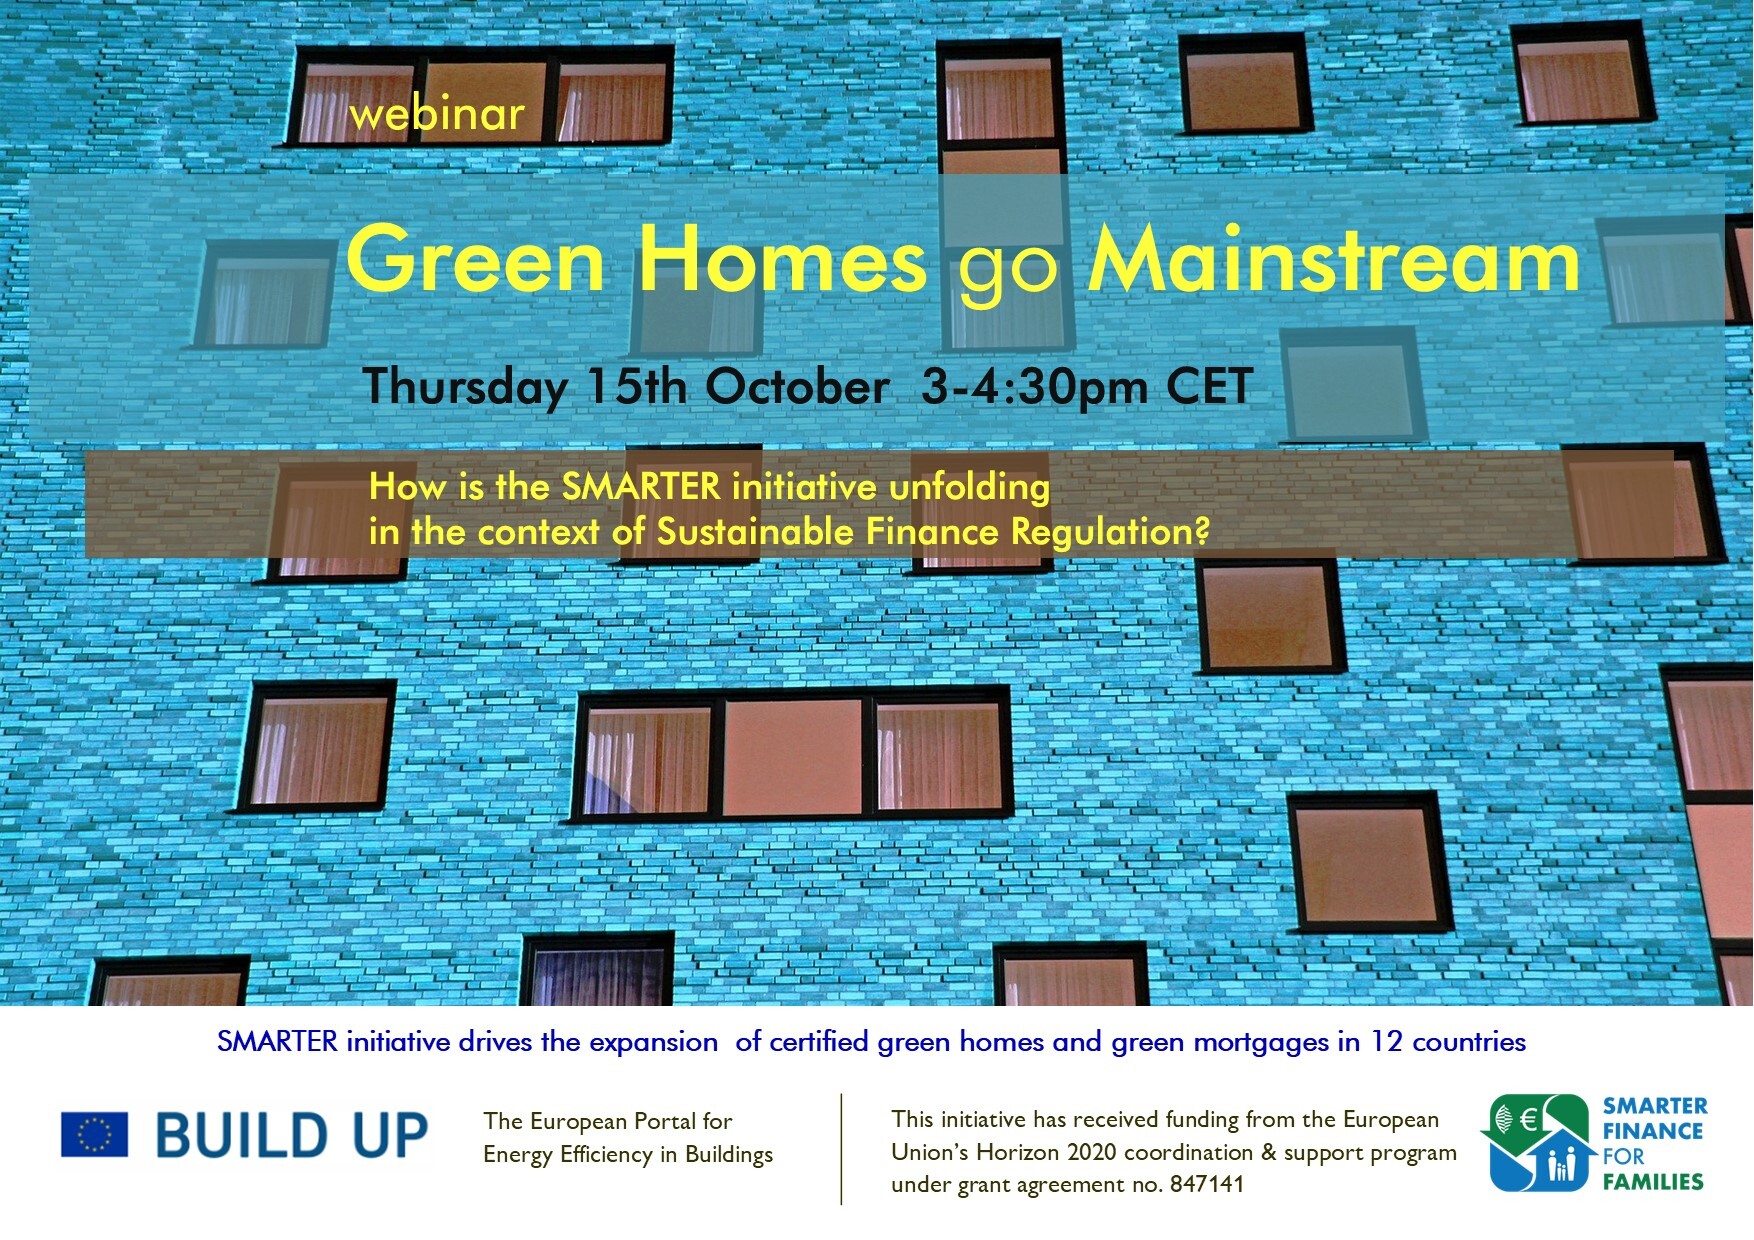 Green Homes going Mainstream - SMARTER Finance for Families - H2020 Project